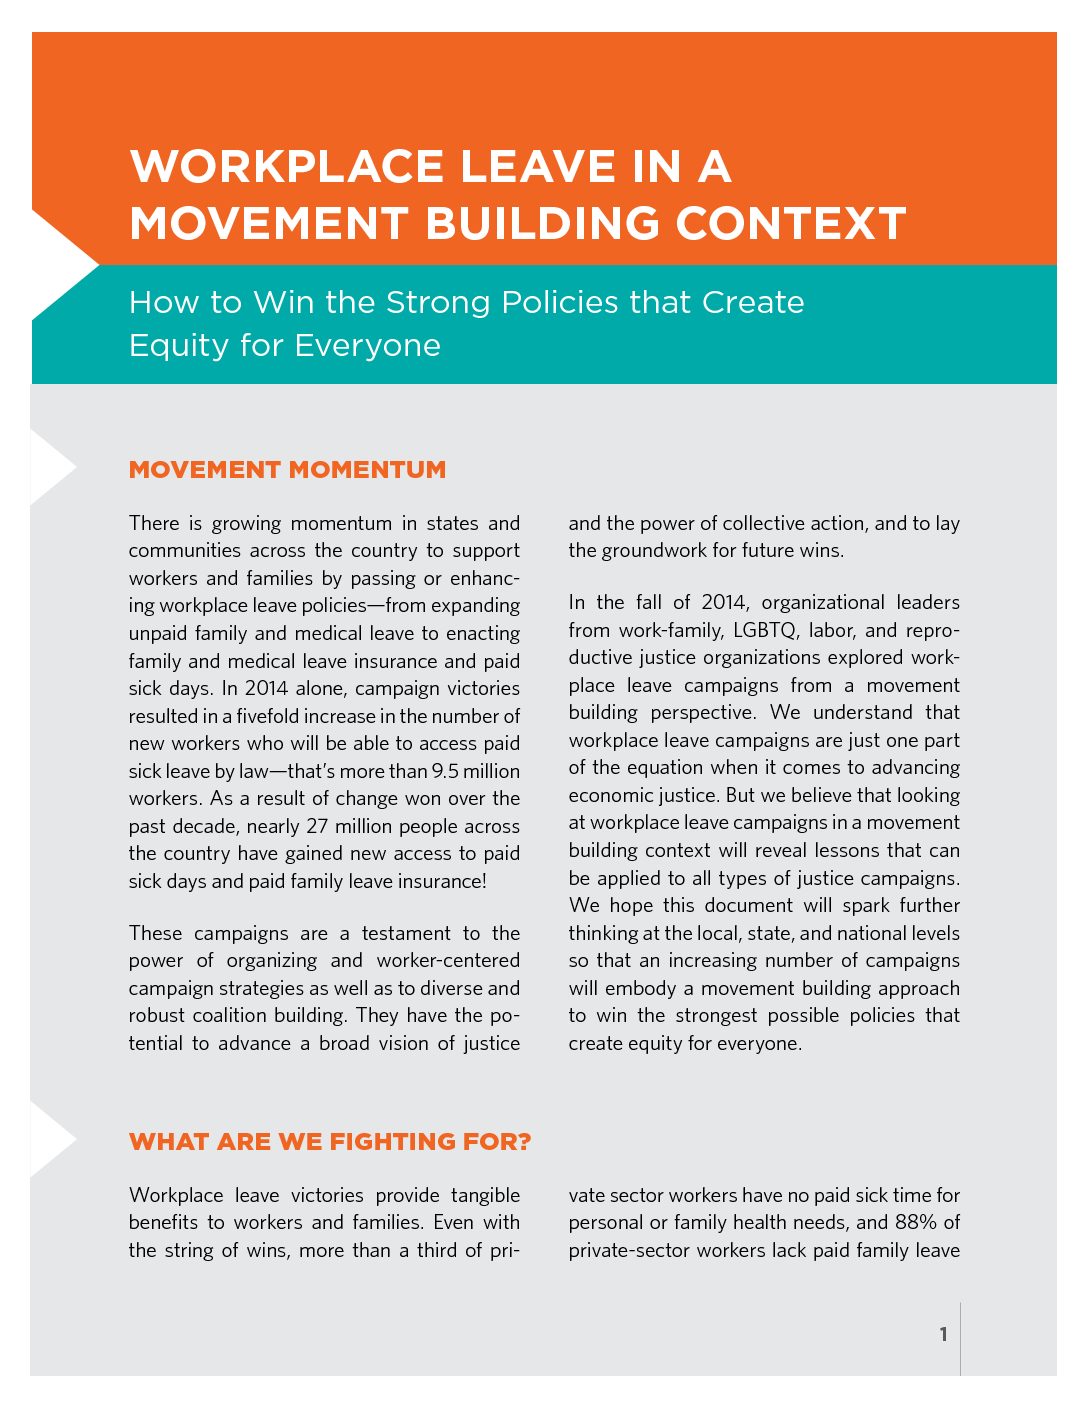 Workplace Leave in a Movement-Building Context